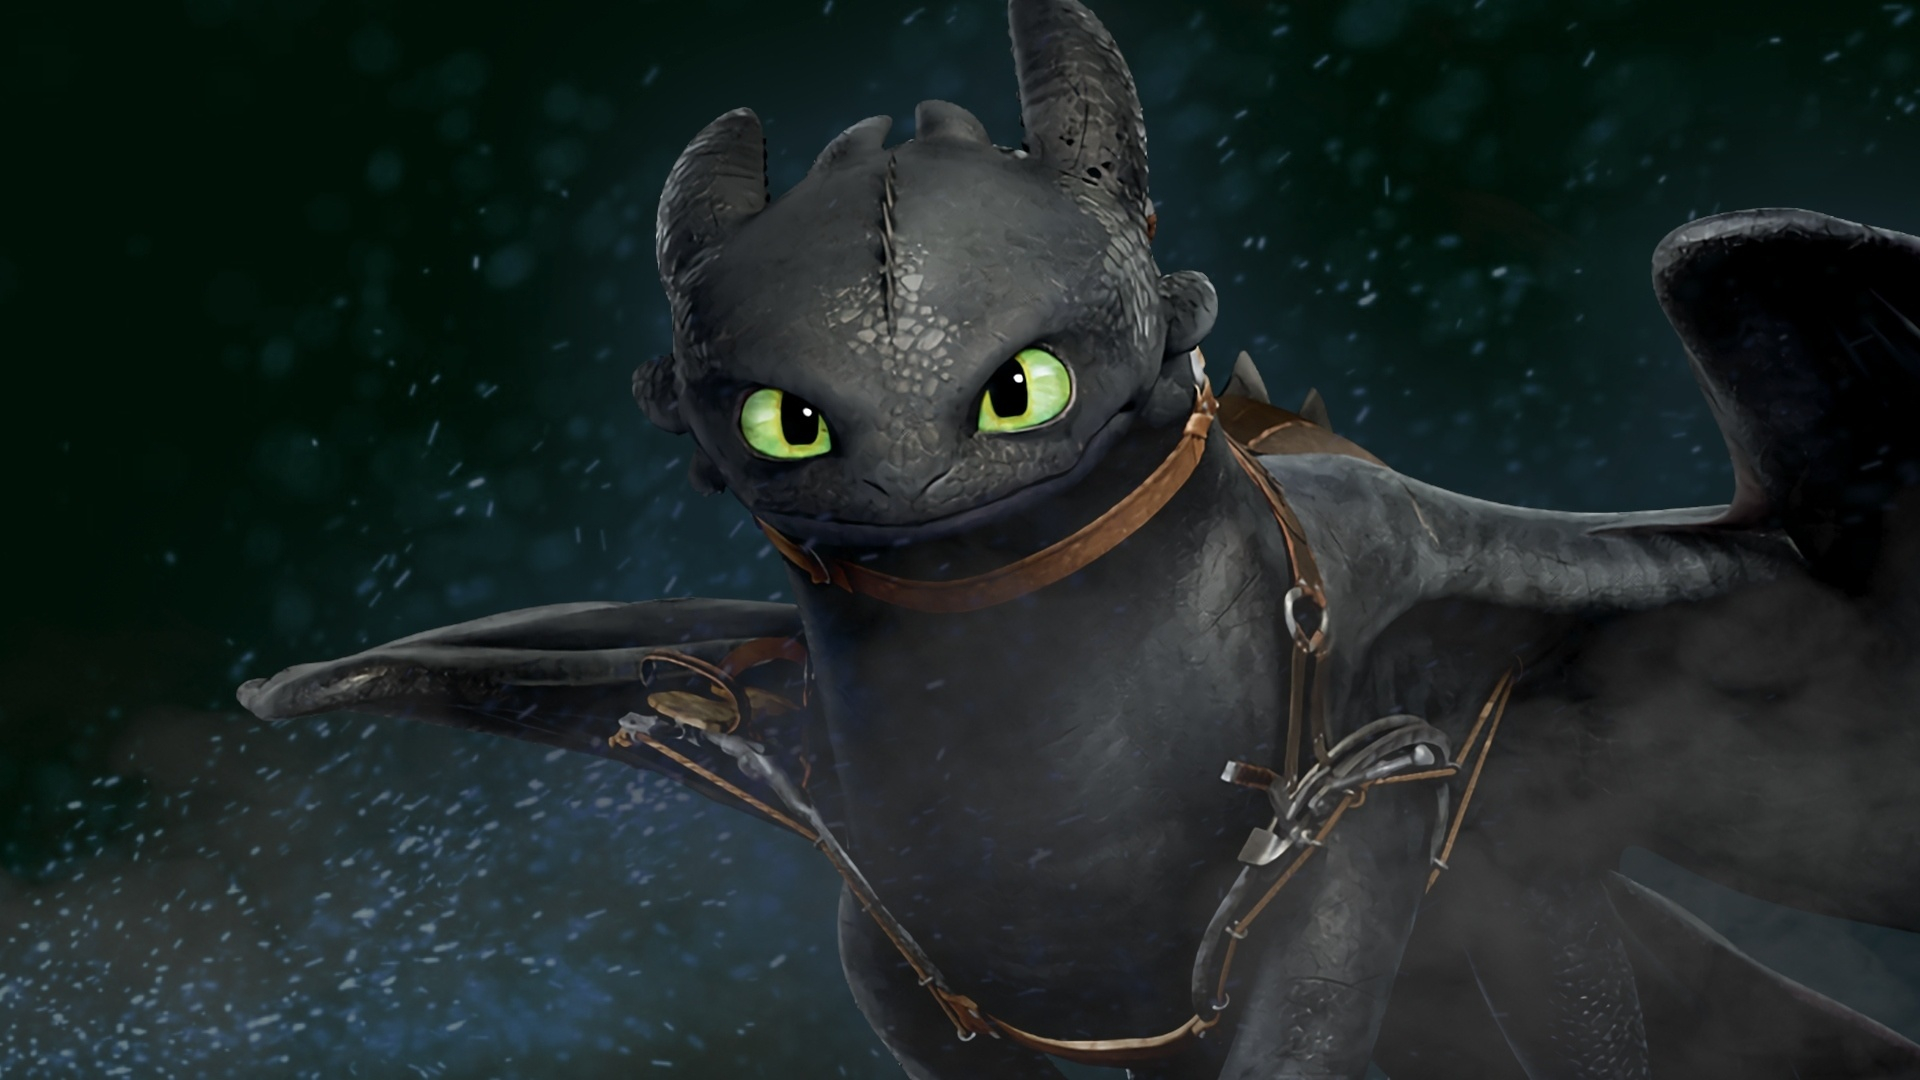 1920x1080 Download dragon, toothless, how to train your dragon 2, animated movie wallpaper, full hd, hdtv, fhd, 1080p wallpaper, hd image, background, 9361